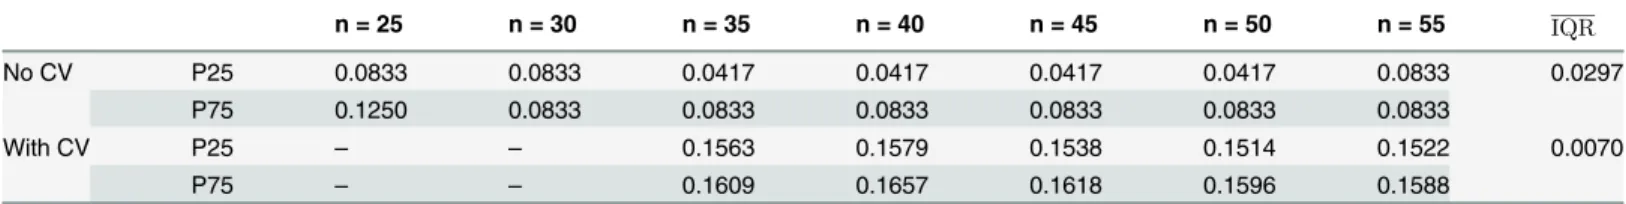 Table 4. Mean interquartile range (IQR) demonstrates decreased variability of cross-validated random repeated sampling (RRS) over traditional RRS in dataset D 1 